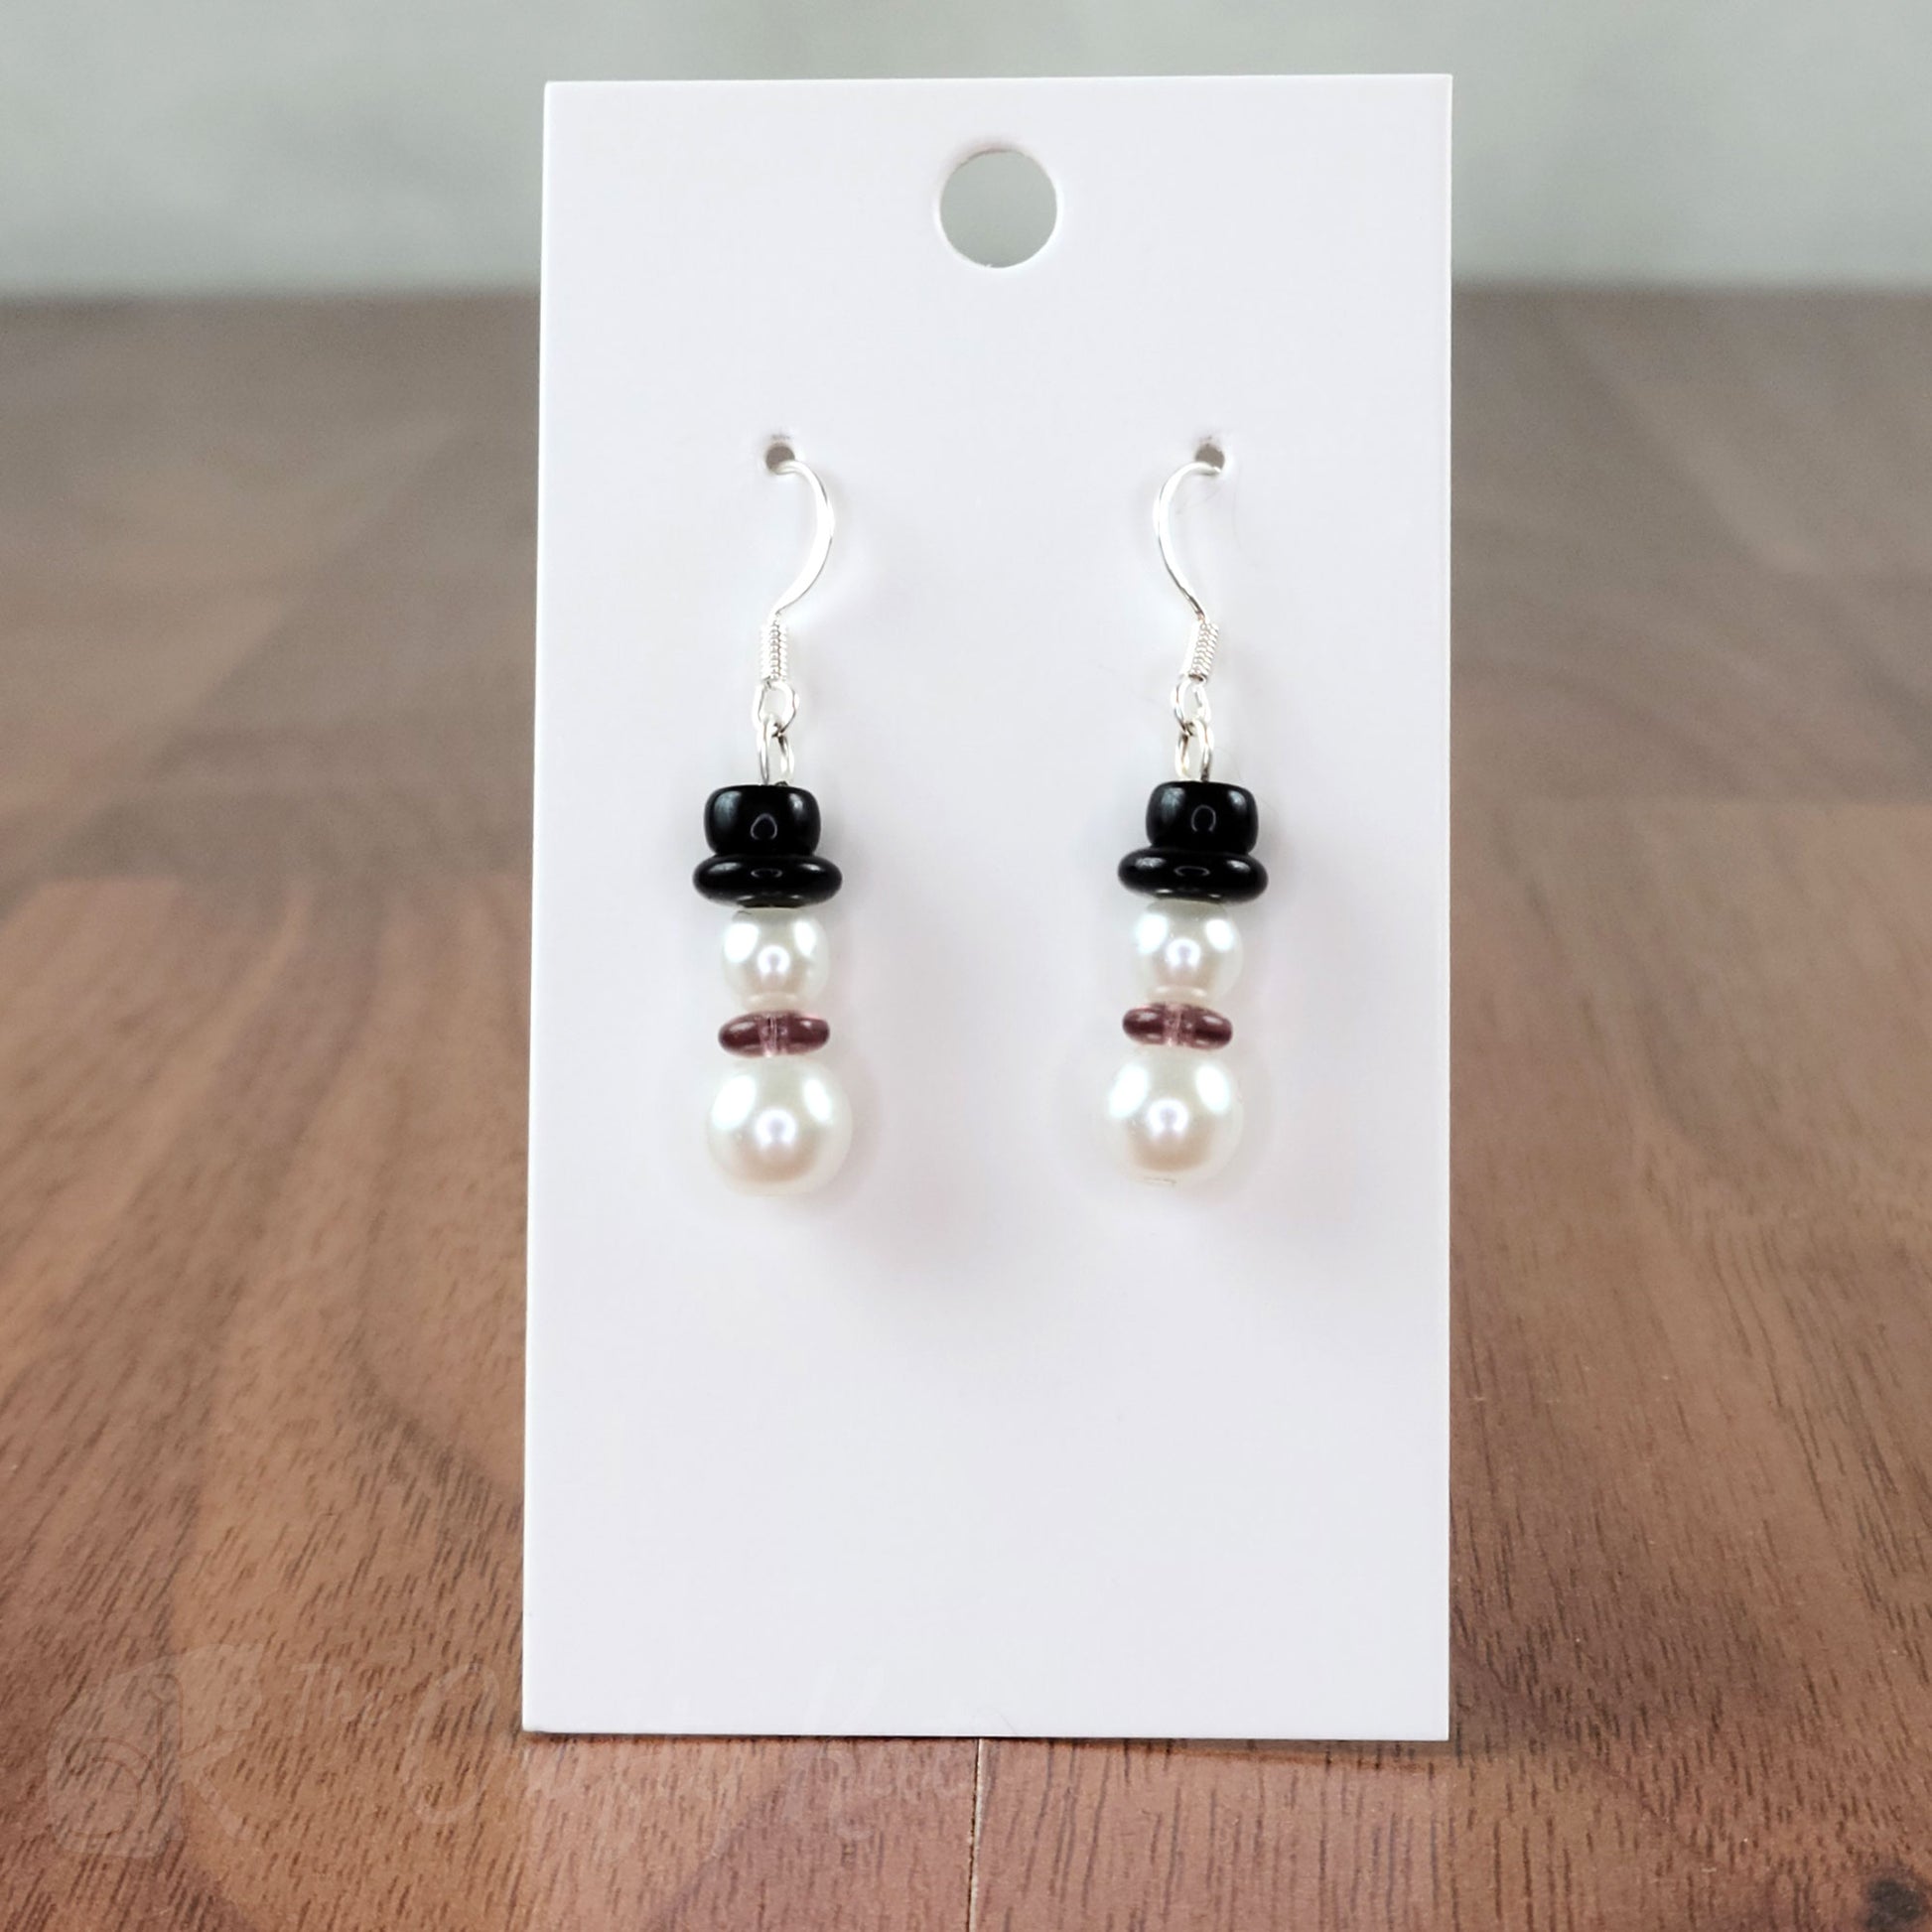 A pair of earring drops made of glass pearls and pressed glass beads, each drop forming the shape of a snowman with a purple scarf and black top hat.